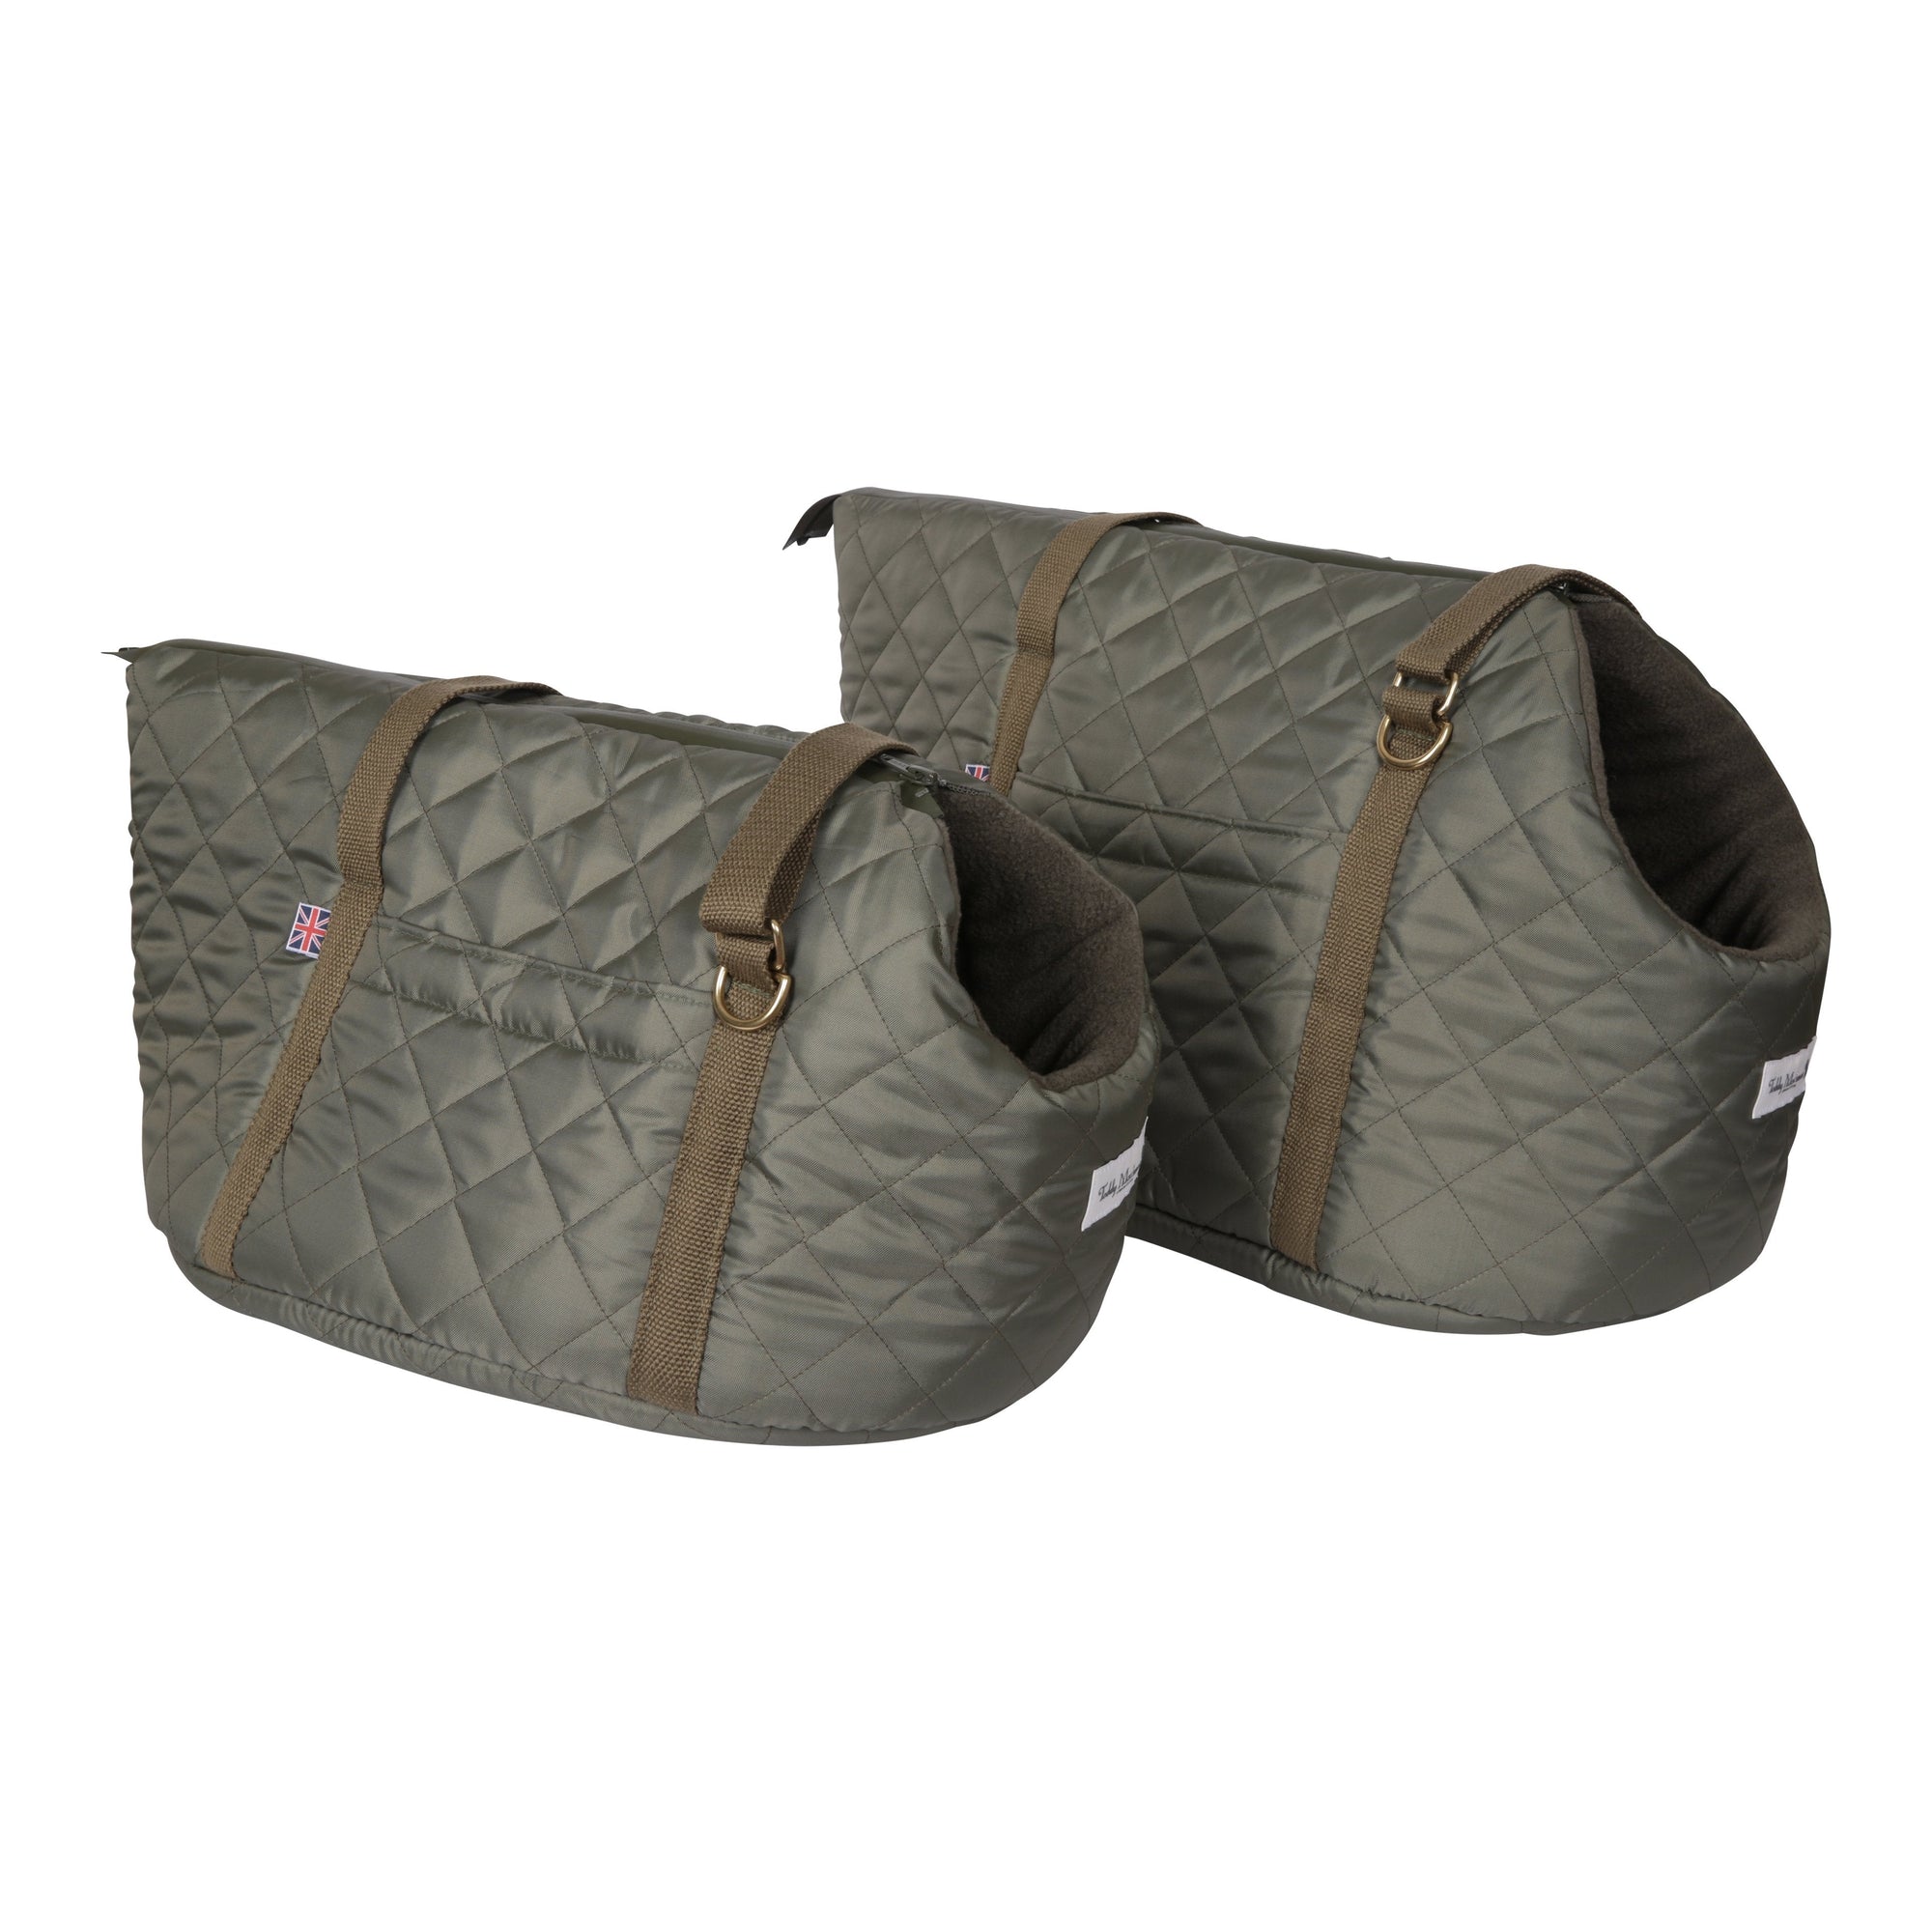 'The Explorer' Quilted Comfort Dog Carrier NEW!!